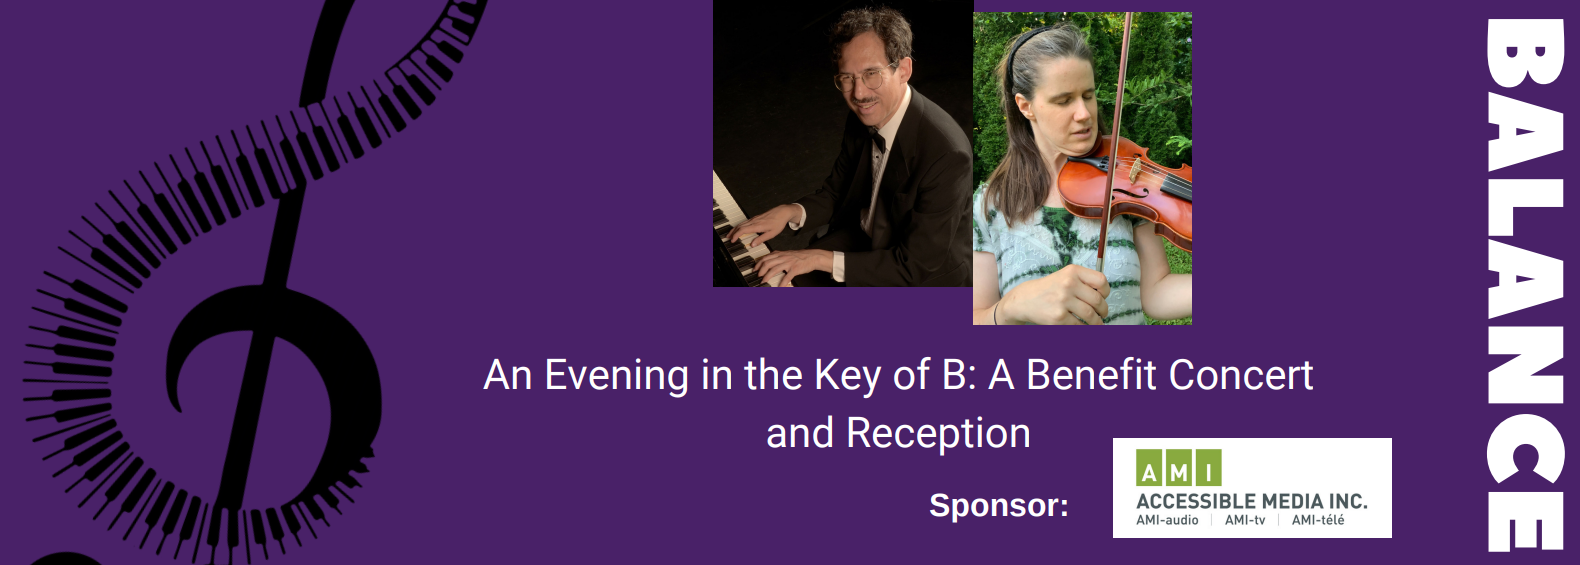 Banner shows a treble clef made of piano keyboard, as well as photos of the 2 performers, and AMI sponsorship logo, the title of the event, and the name of BALANCE.